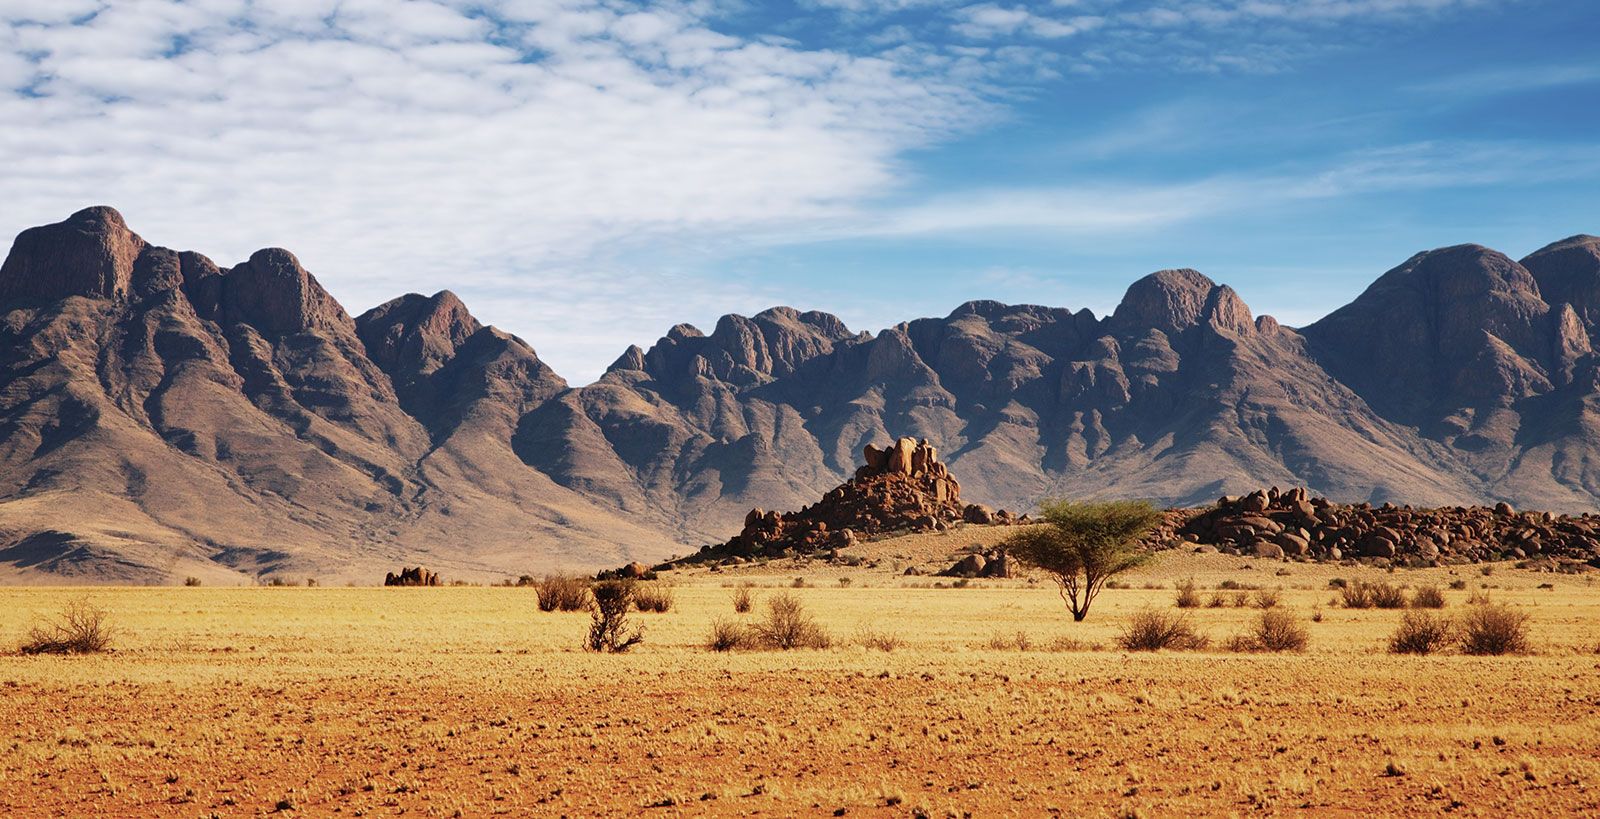 Namib. Location, Map, Climate, Plants, Animals, & Facts